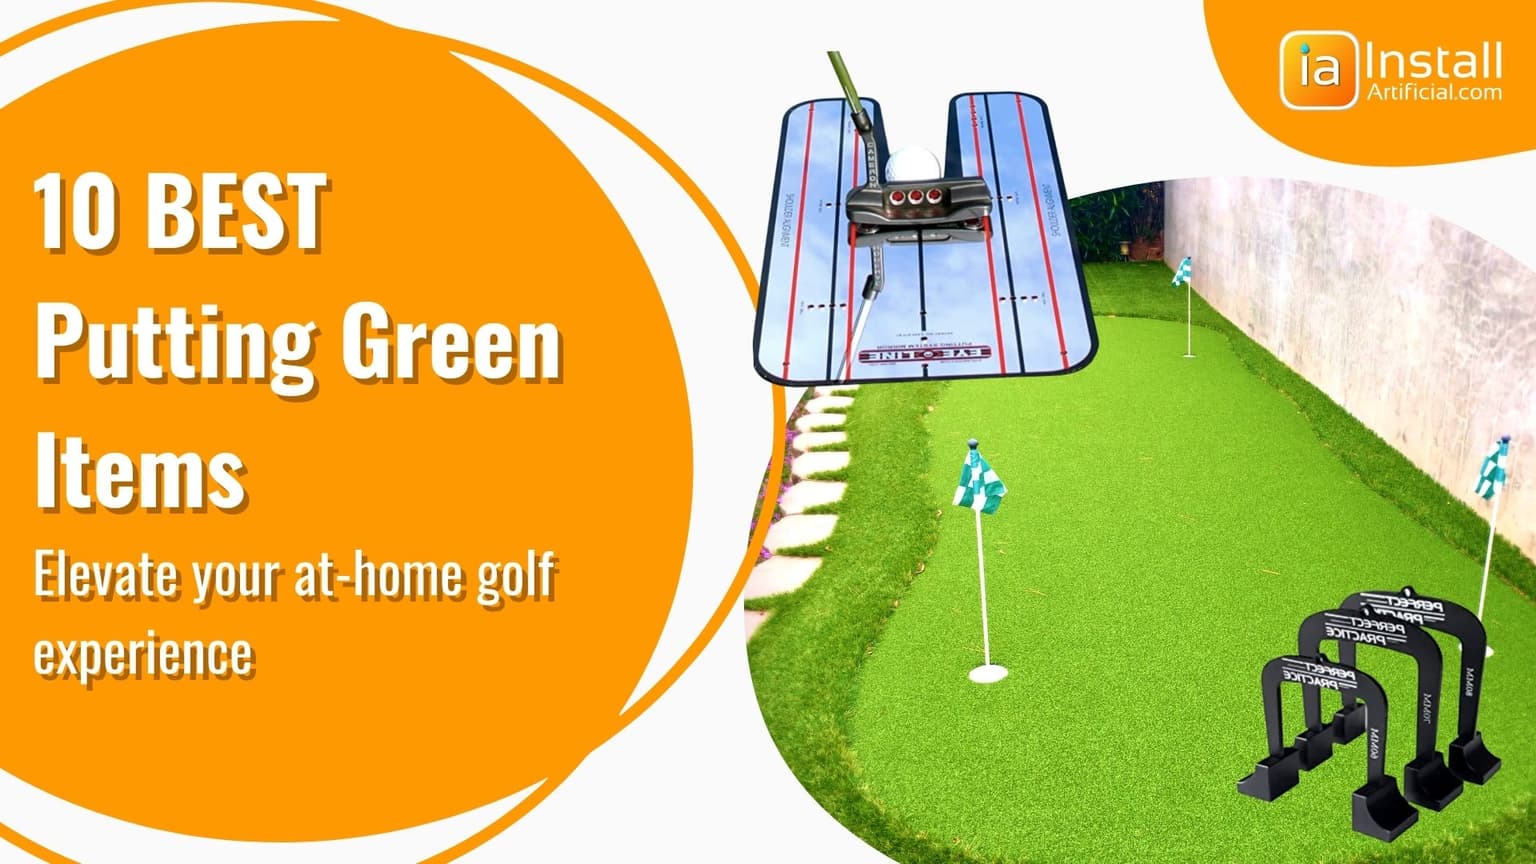 10 Best Putting Green Items to Elevate your Golf Experience at Home